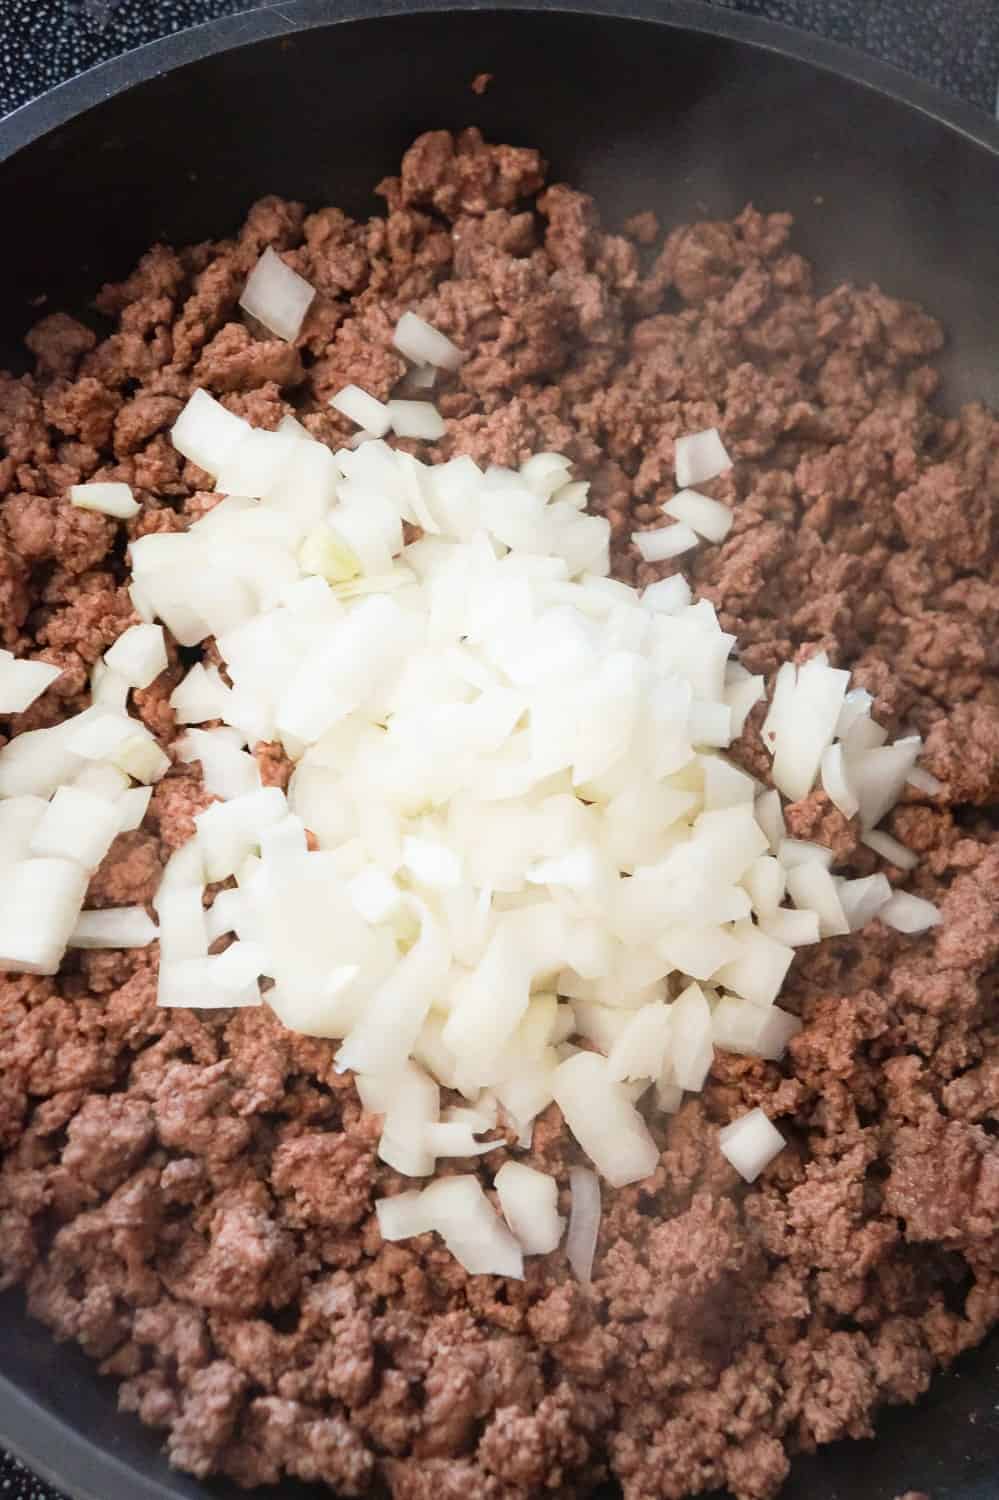 diced onions on top of ground beef in a frying pan